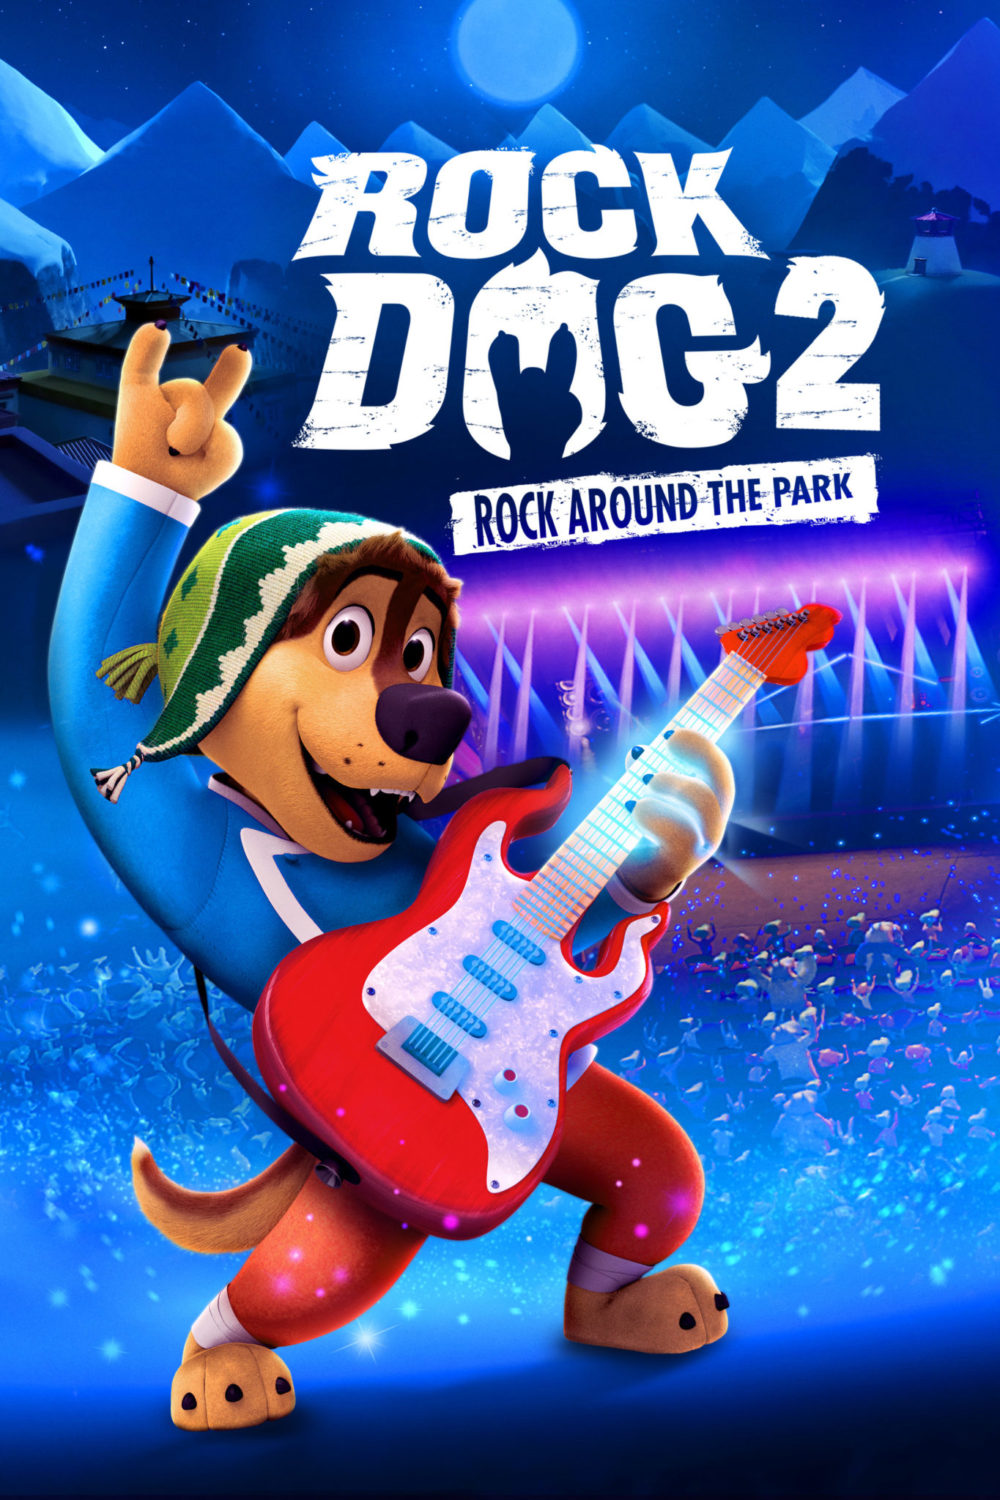 Rock Dog 2: Rock Around The Park arrives on Digital 6/11, and on Blu-ray and DVD 6/15